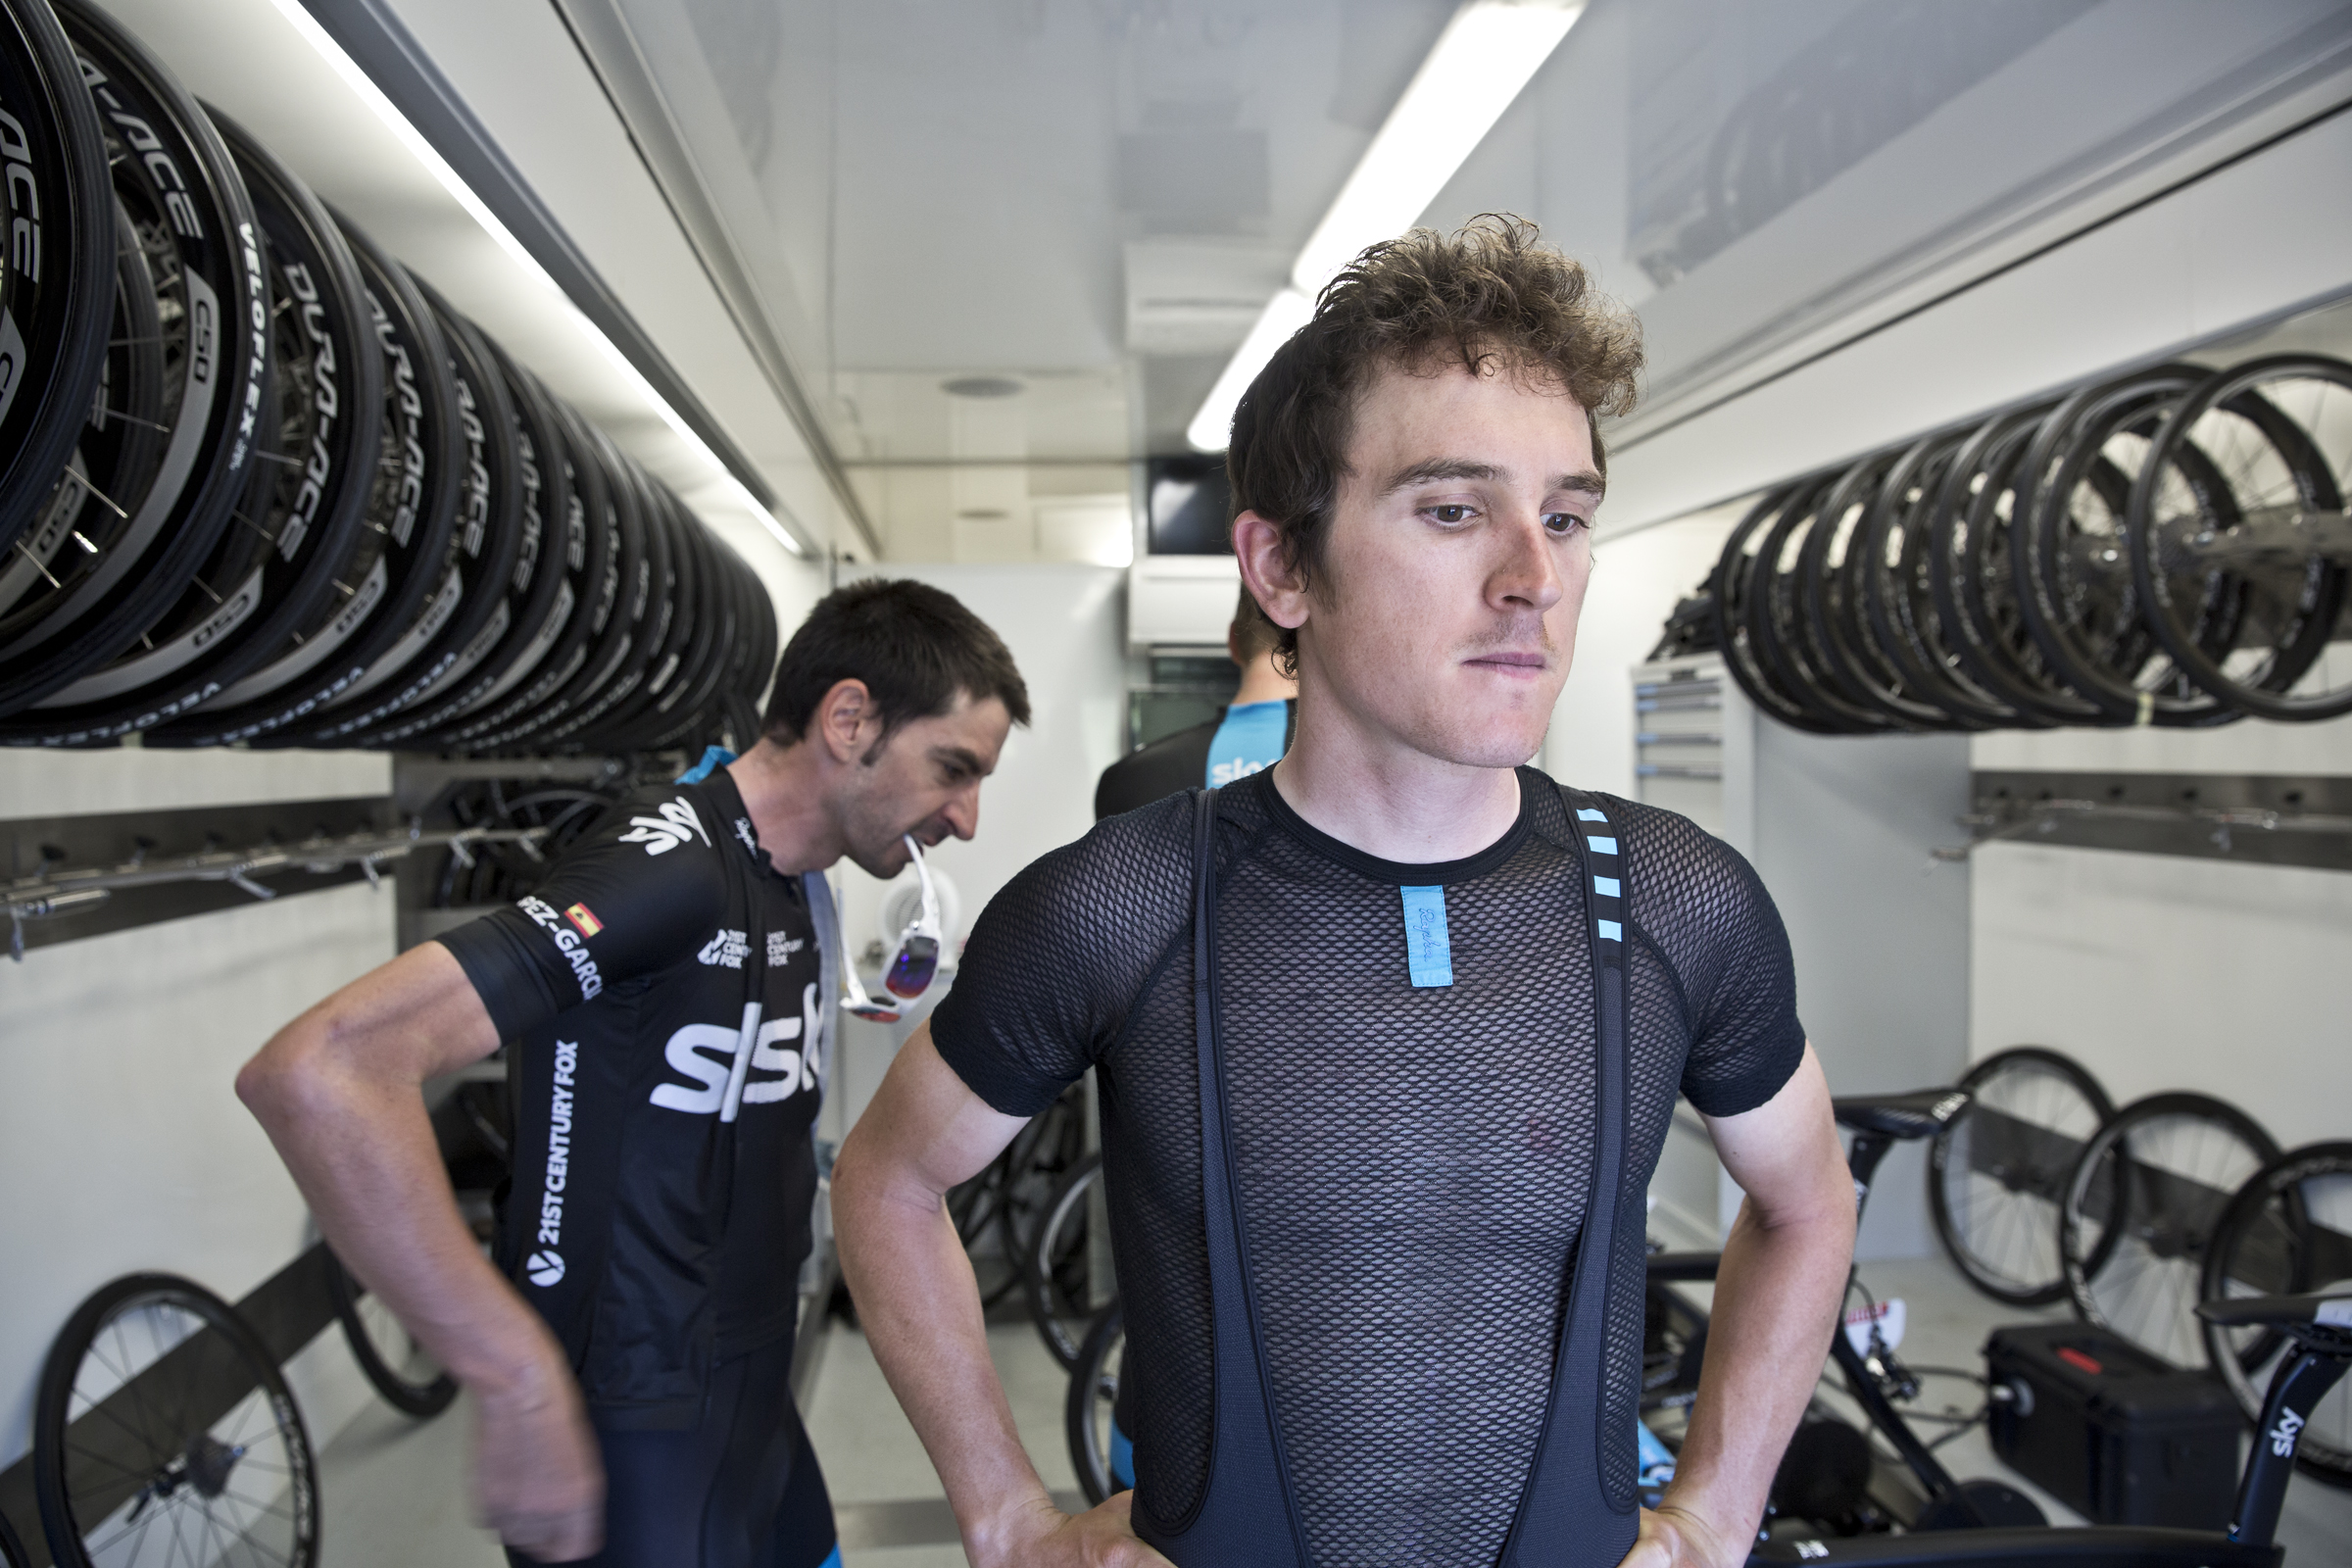 Geraint Thomas of Team SKY on a rest day on July 15, 2014 in Besancon, France. (Photo by Scott Mitchell/teamsky.com via Getty Images)